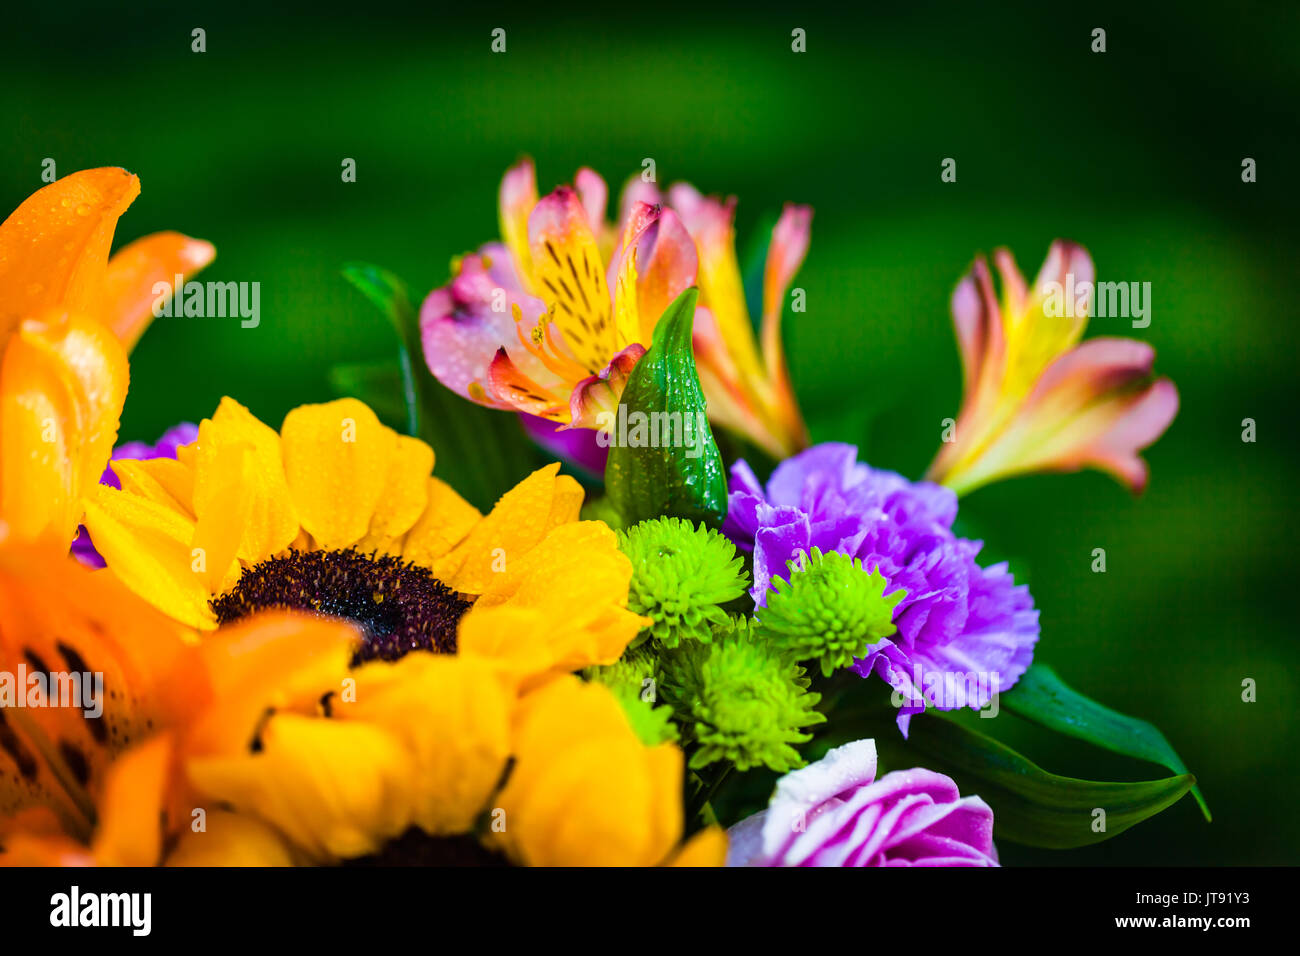 Bouquet of various fresh colorful flowers, green blurred background Stock Photo